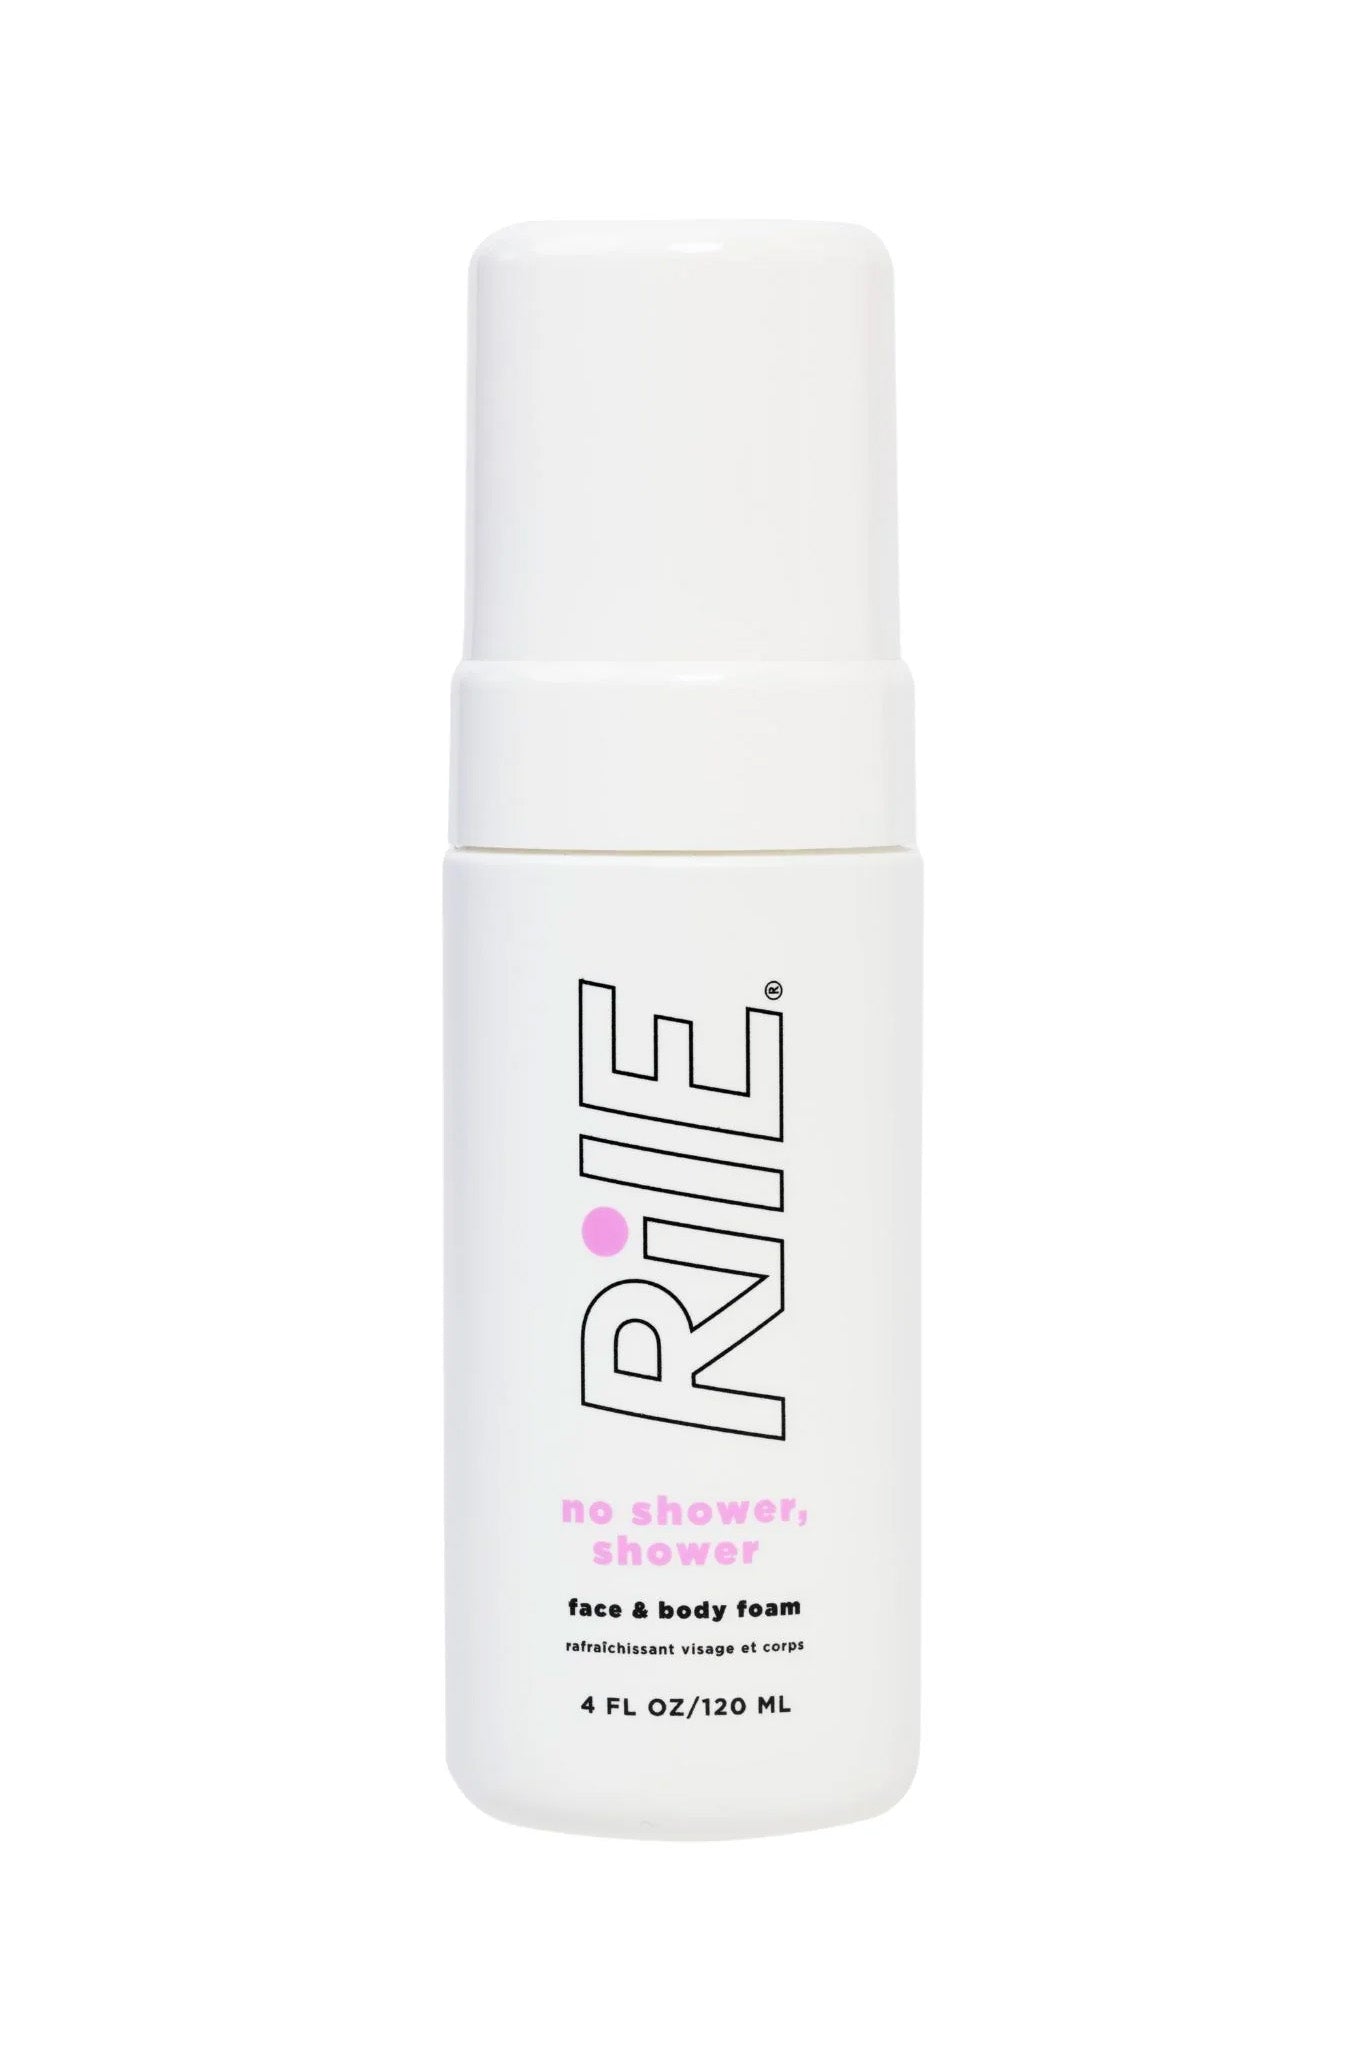 A white bottle of Rile's no shower shower face and body foam refresher for young teens and tweens.